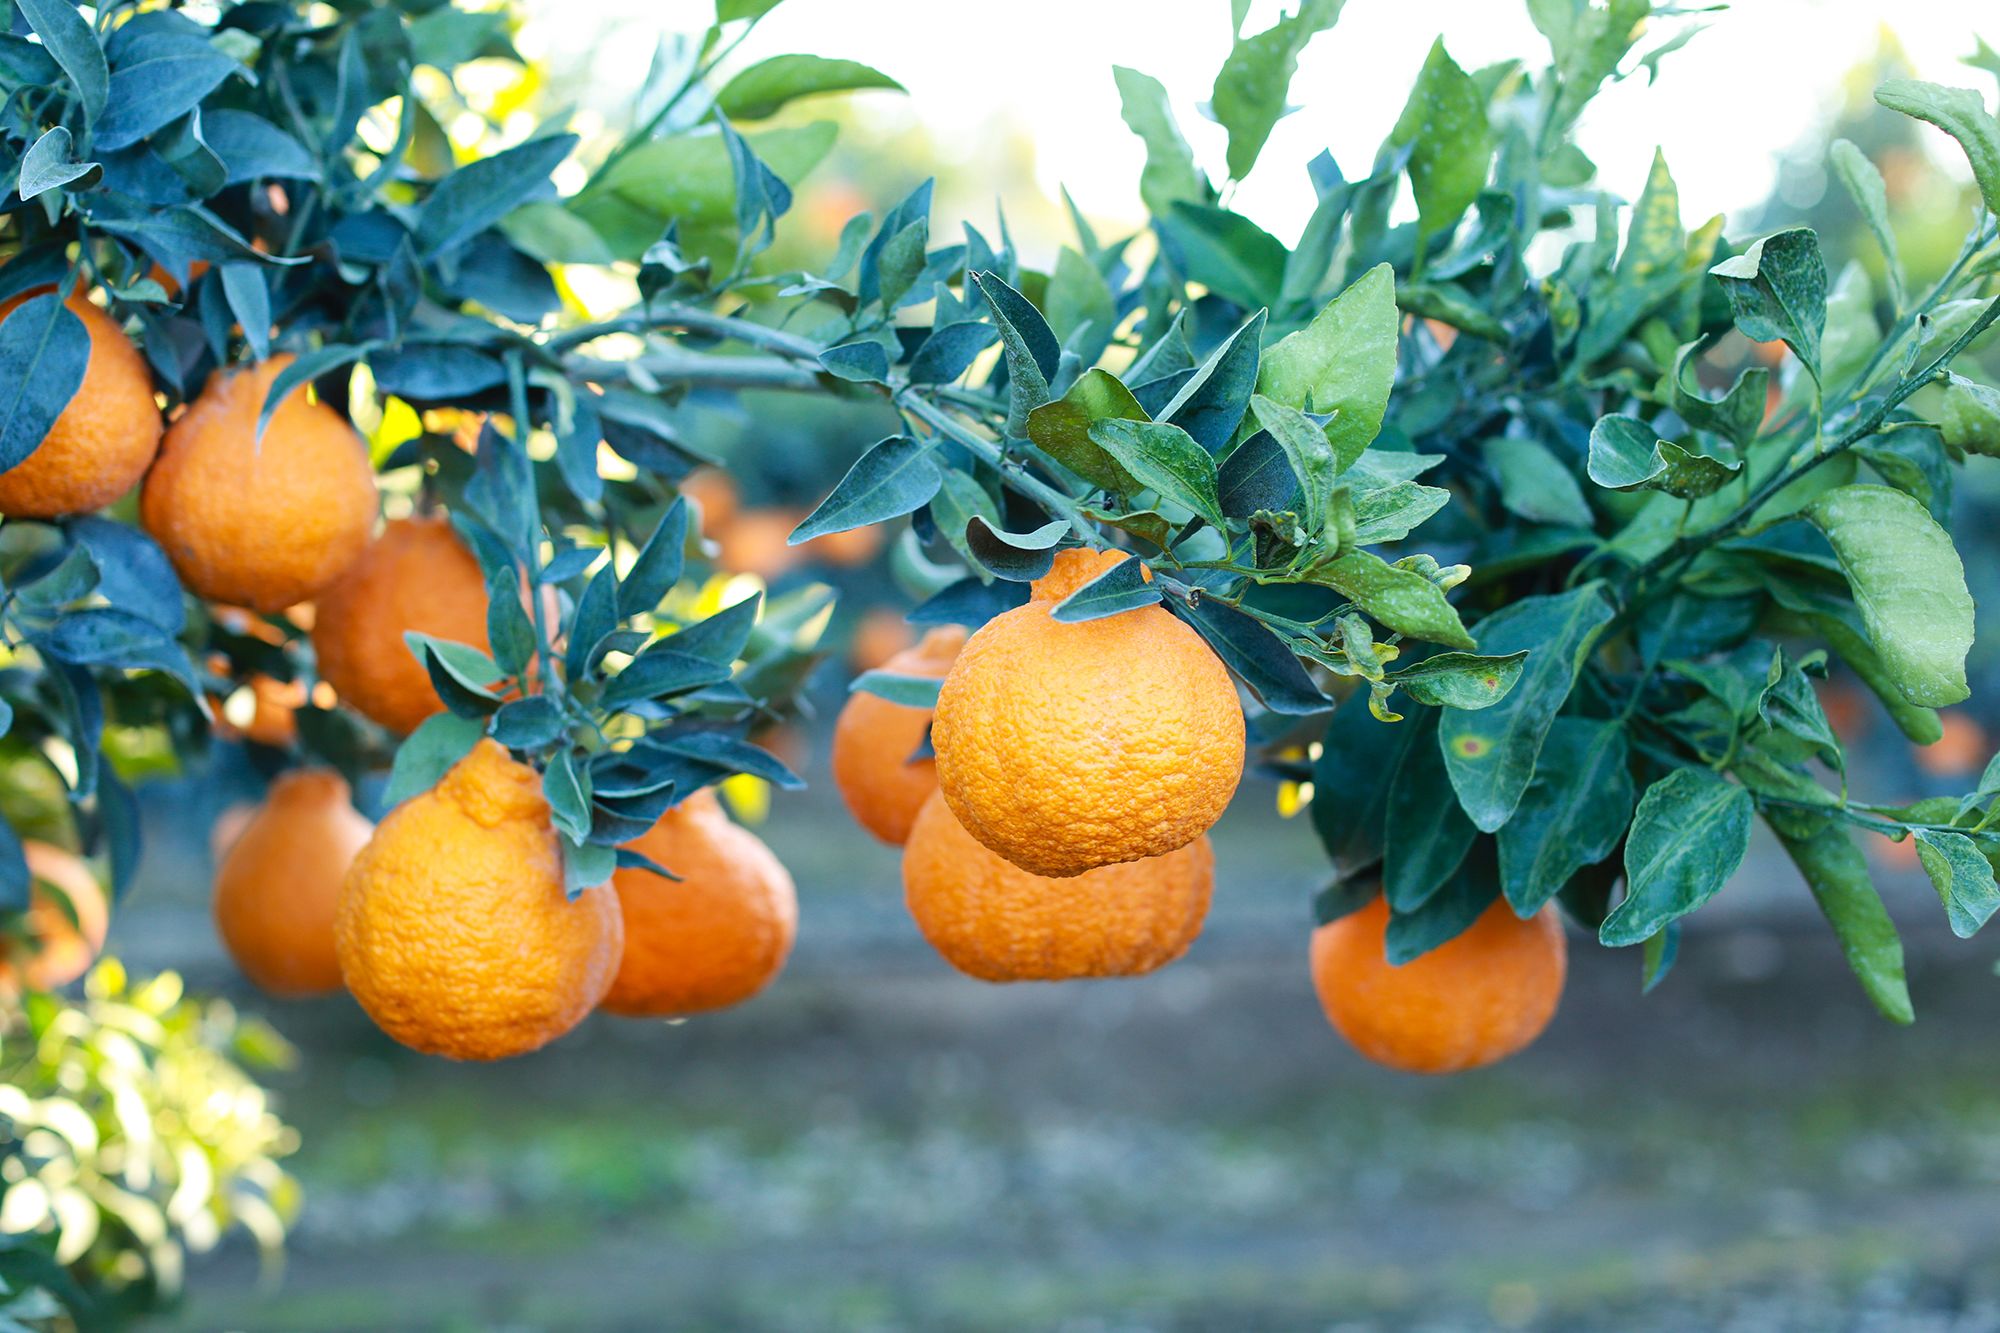 How Sumo Citrus made a little-known Japanese fruit a rising star